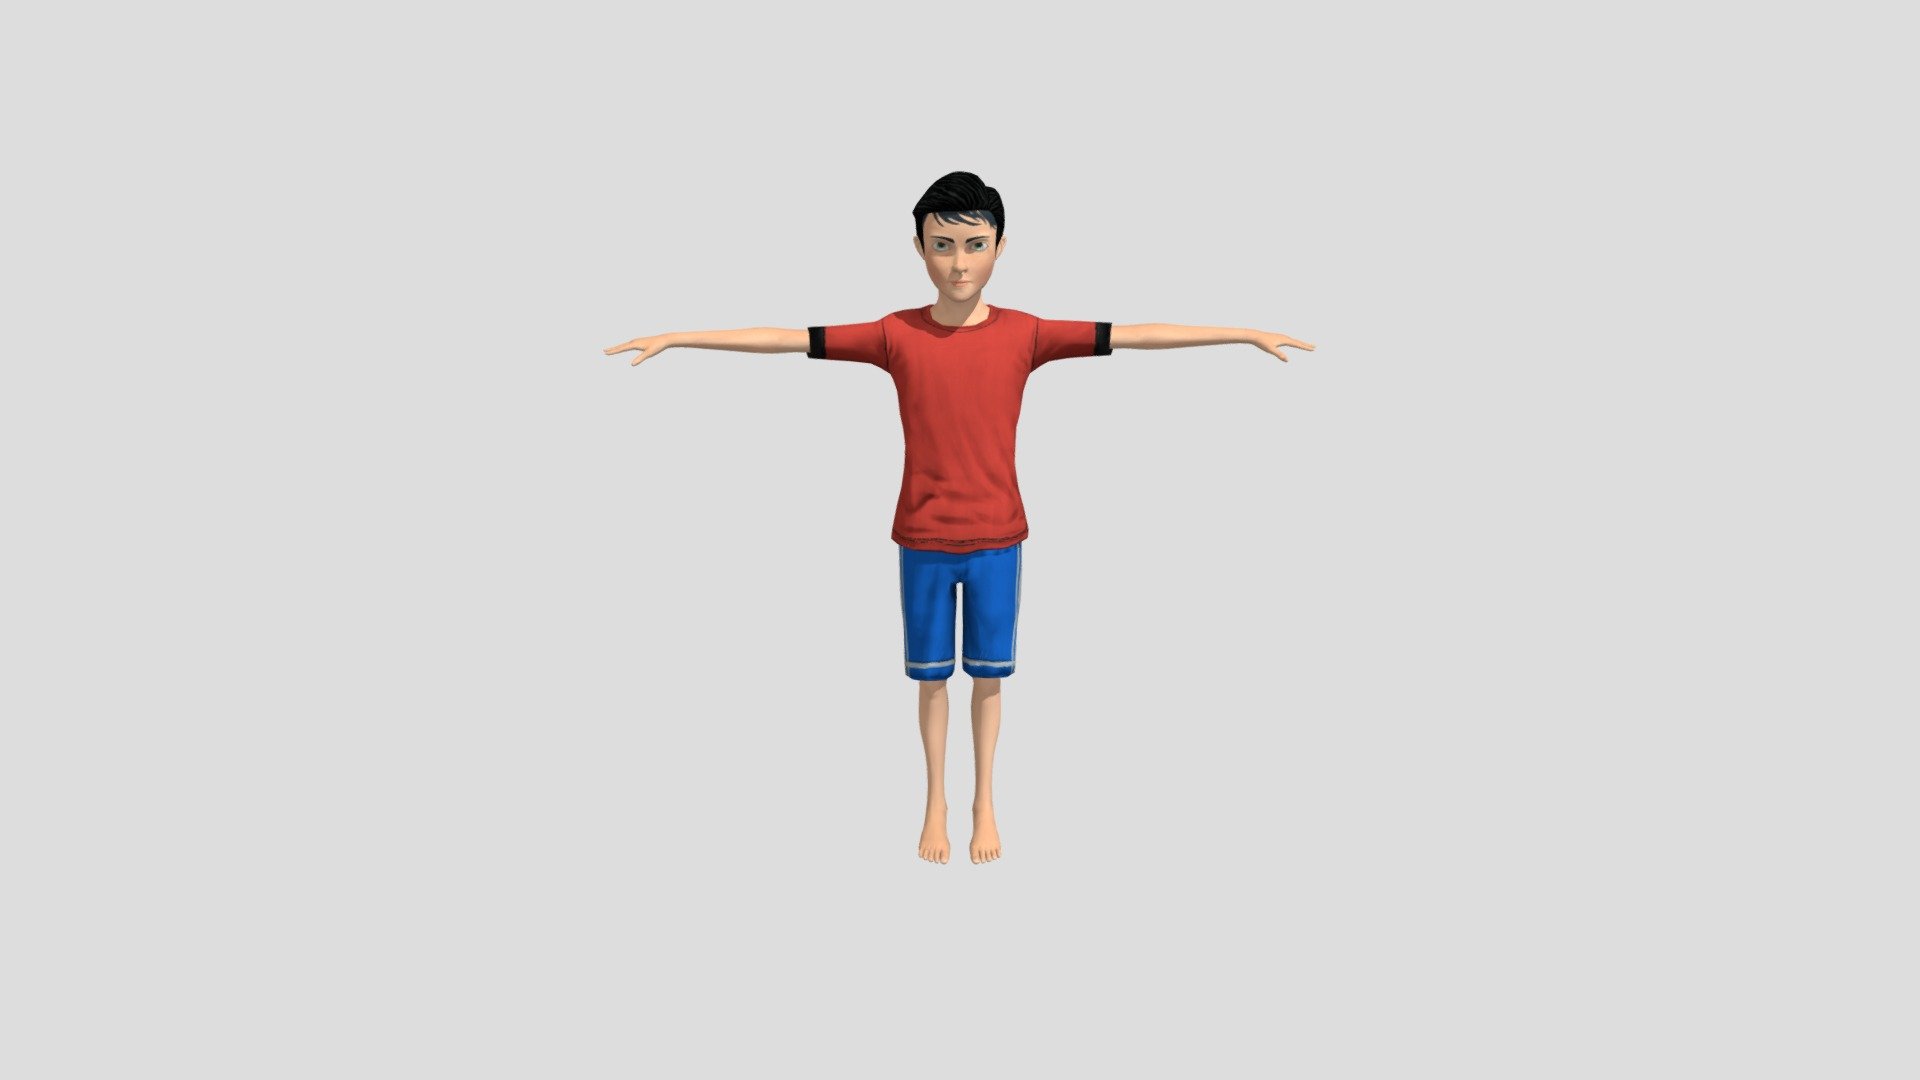 3D male character model ready for rigging and animation.
This character is created with Fuse 3d model